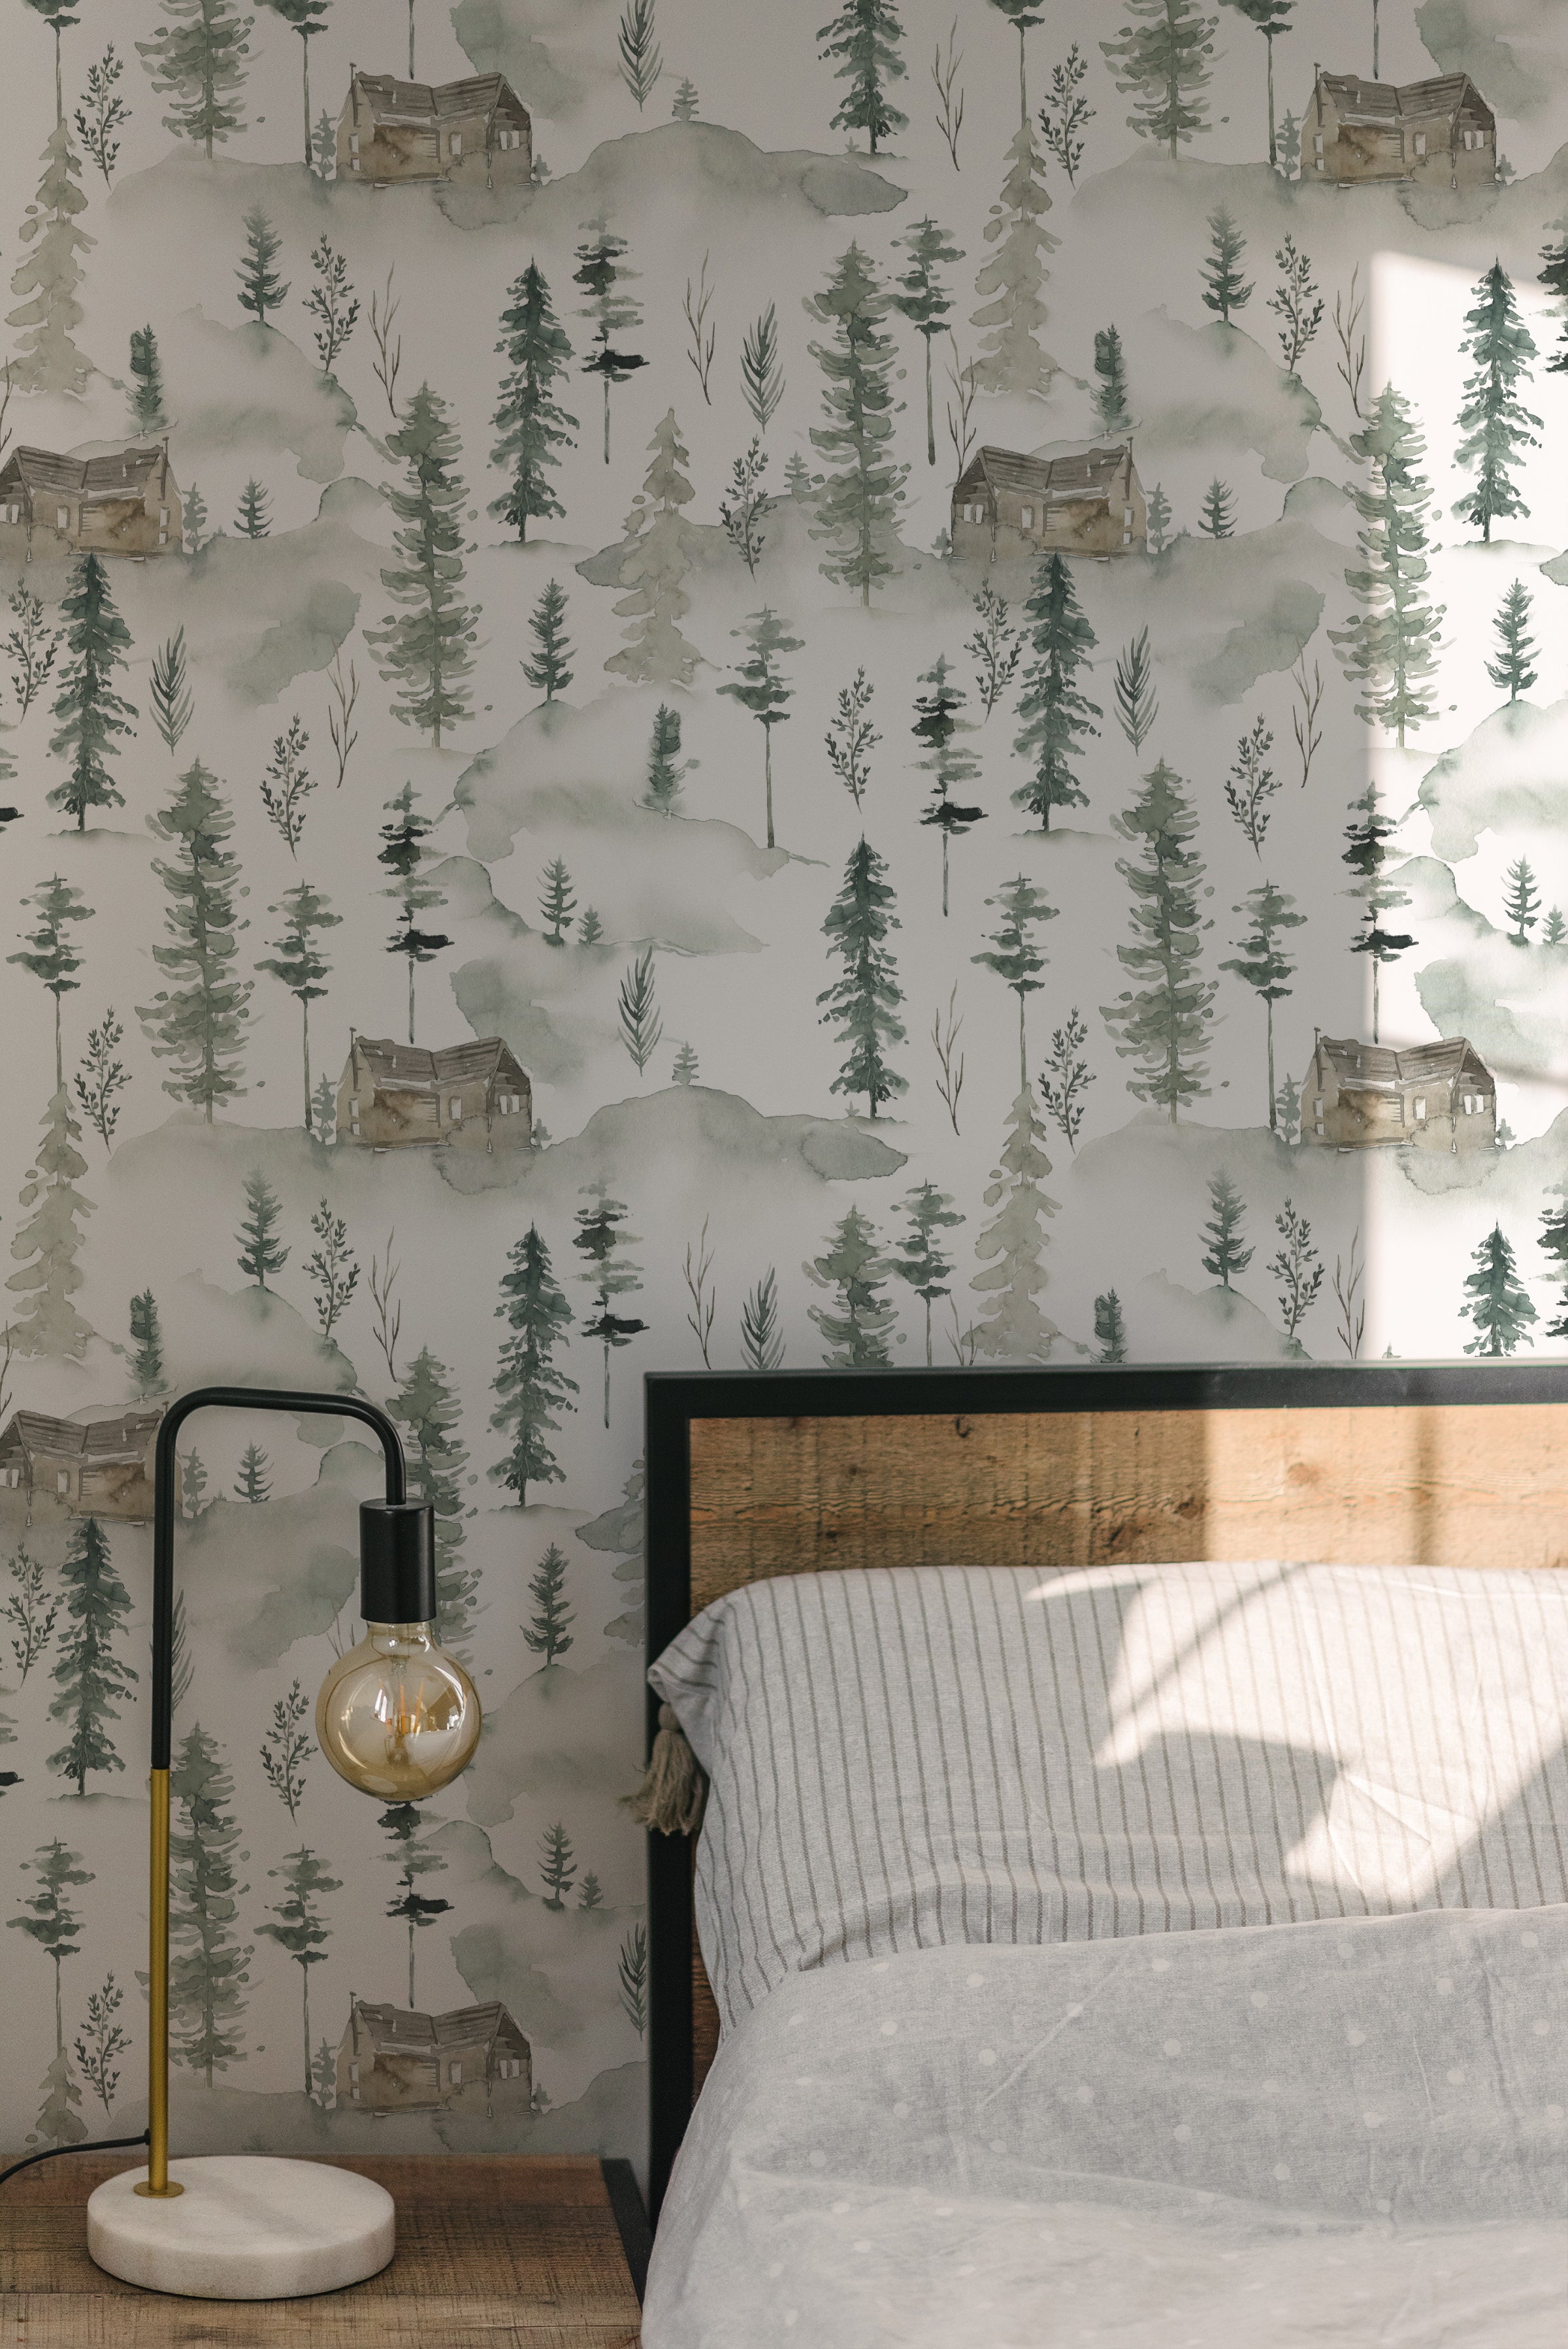 Rustic Retreat: Using Wallpaper to Embrace the Cozy Cabin Look